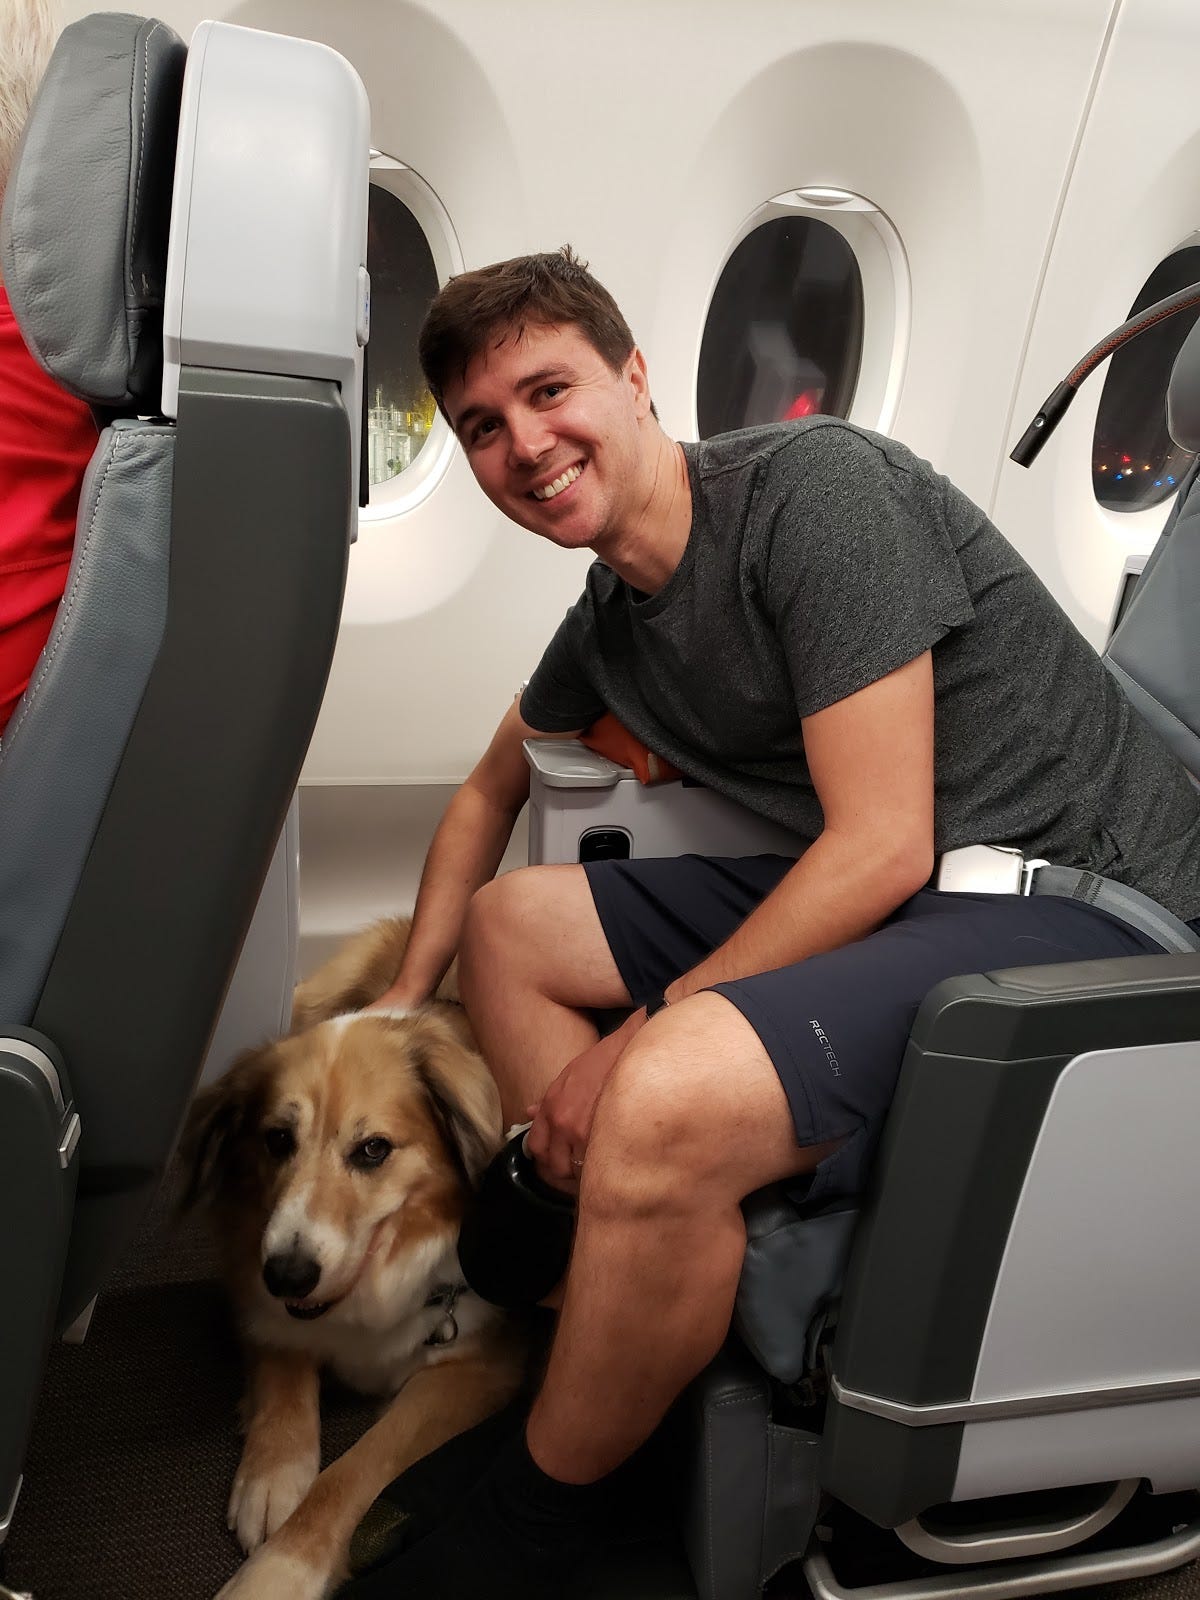 where do large dogs go on a plane